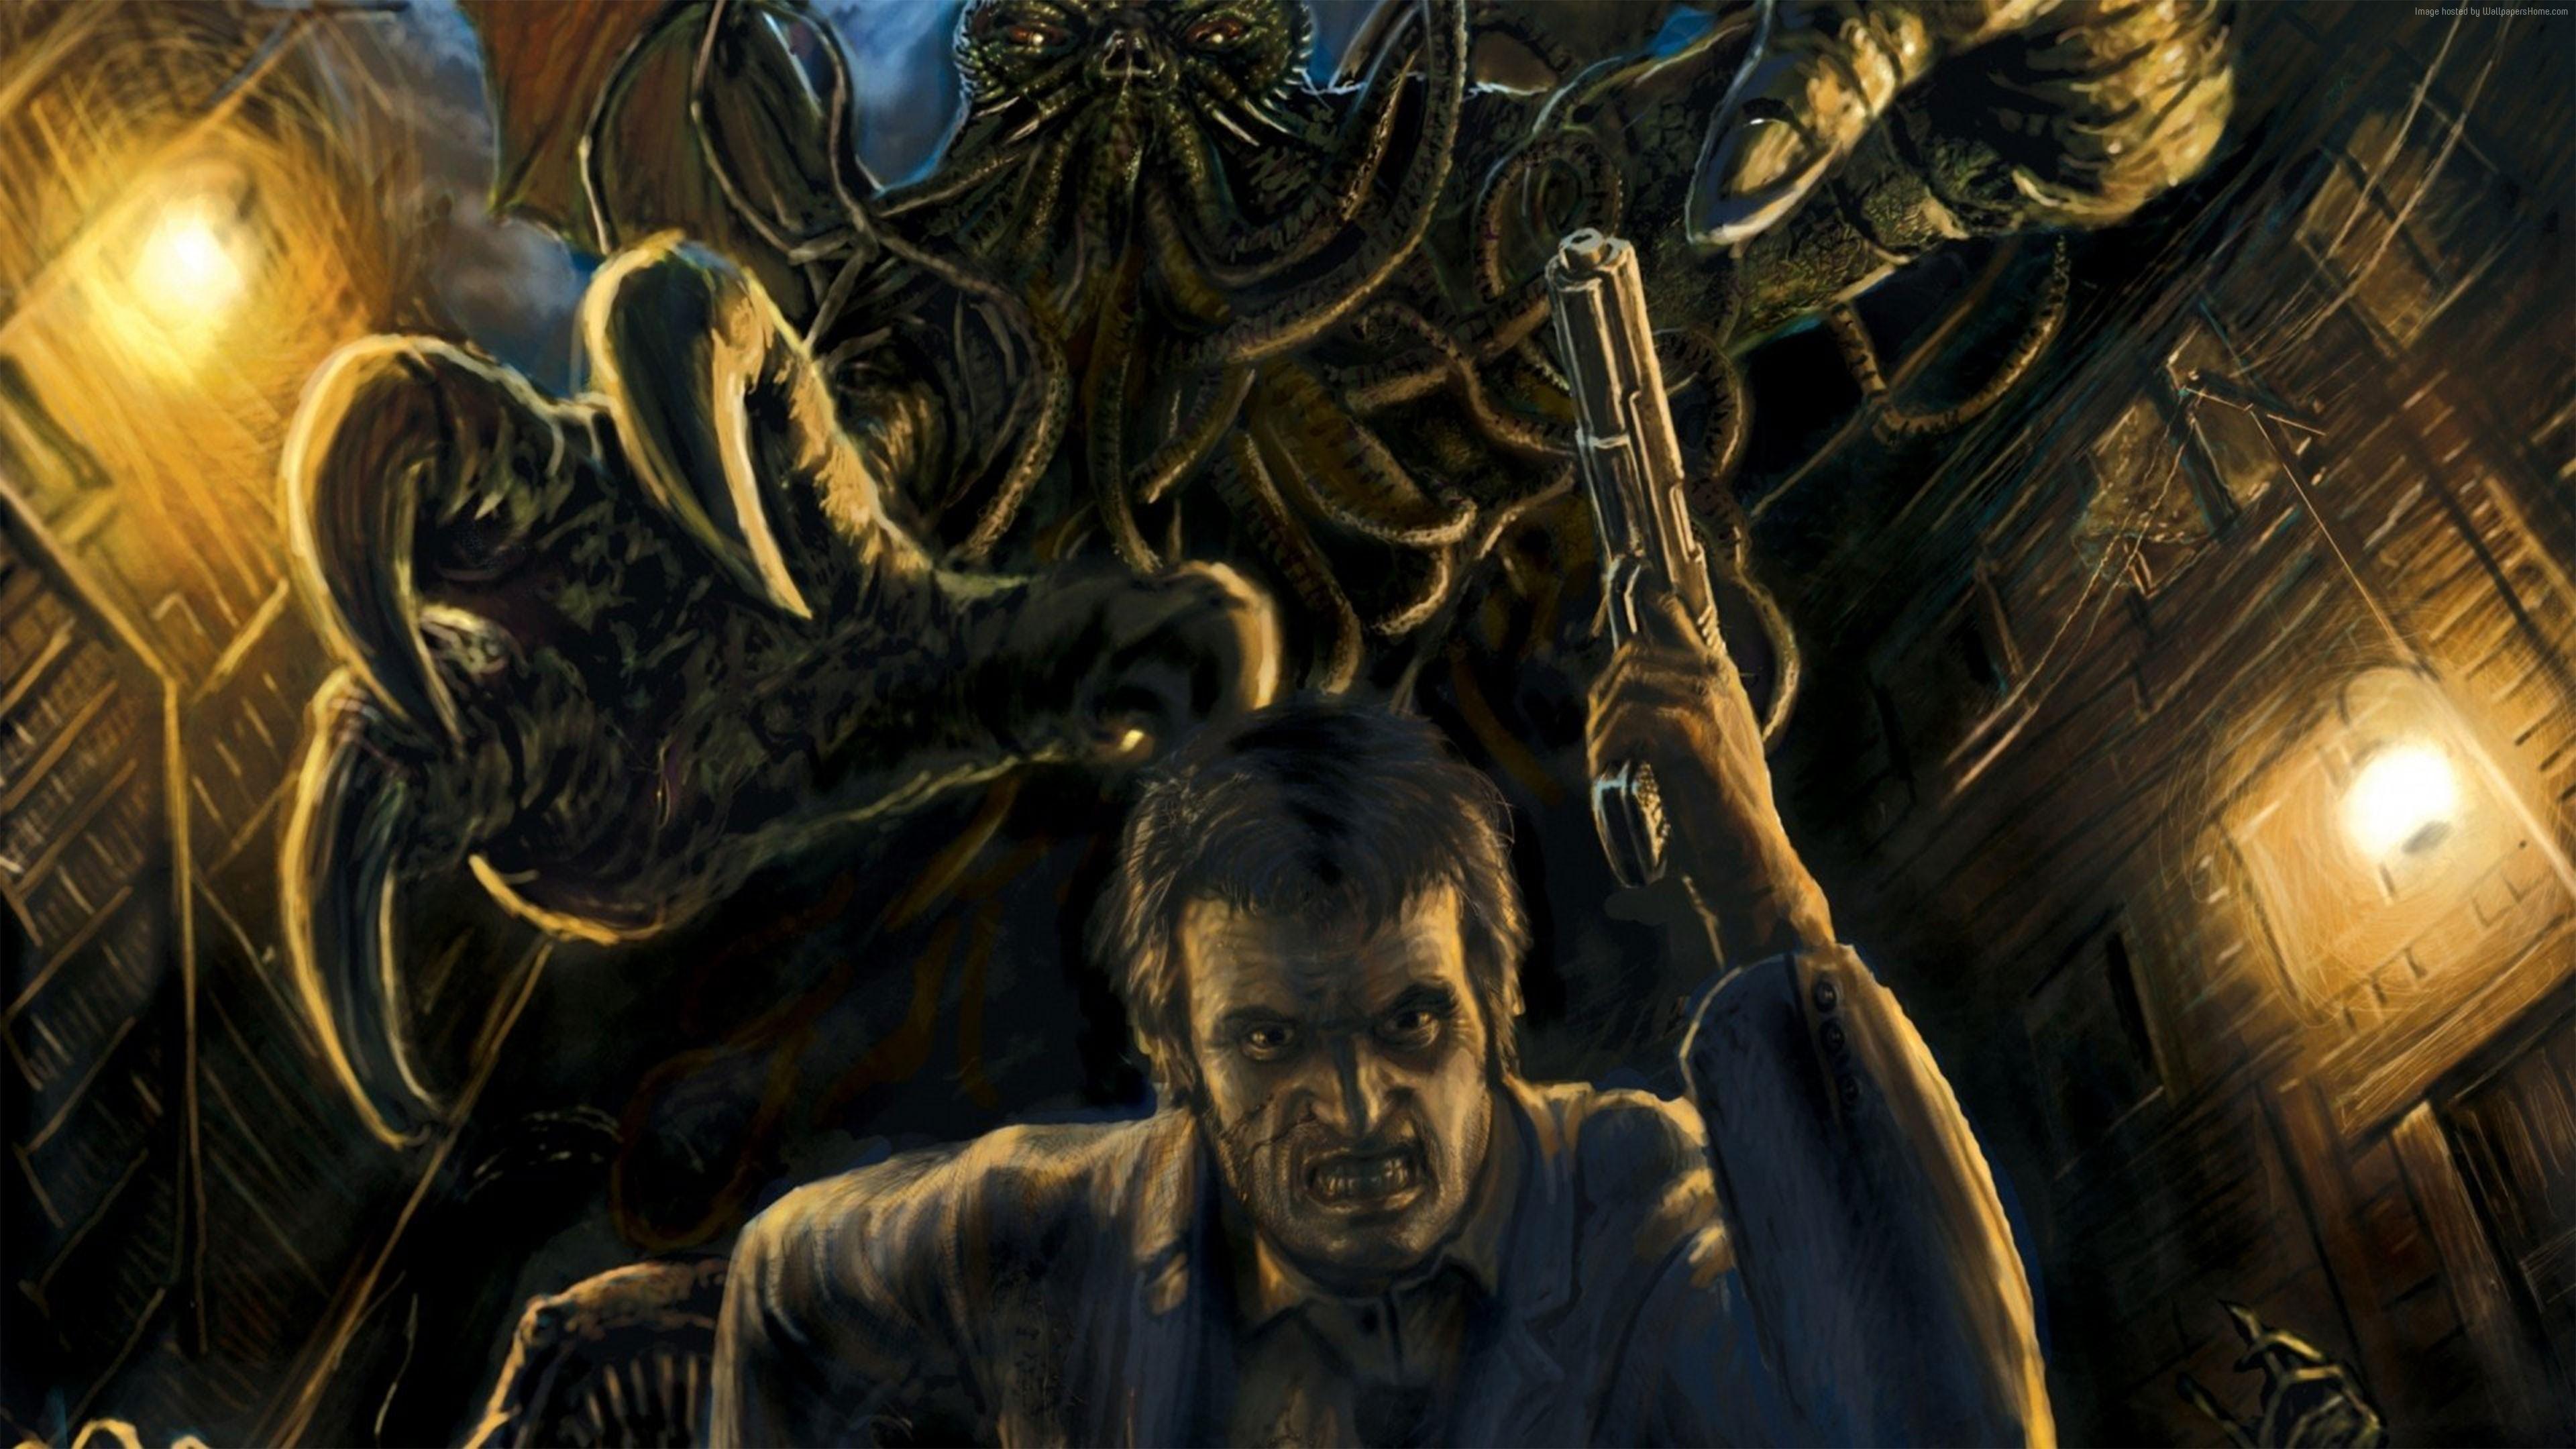 HD wallpaper, Call Of Cthulhu  The Official Video Game, Poster, E3 2017, 4K